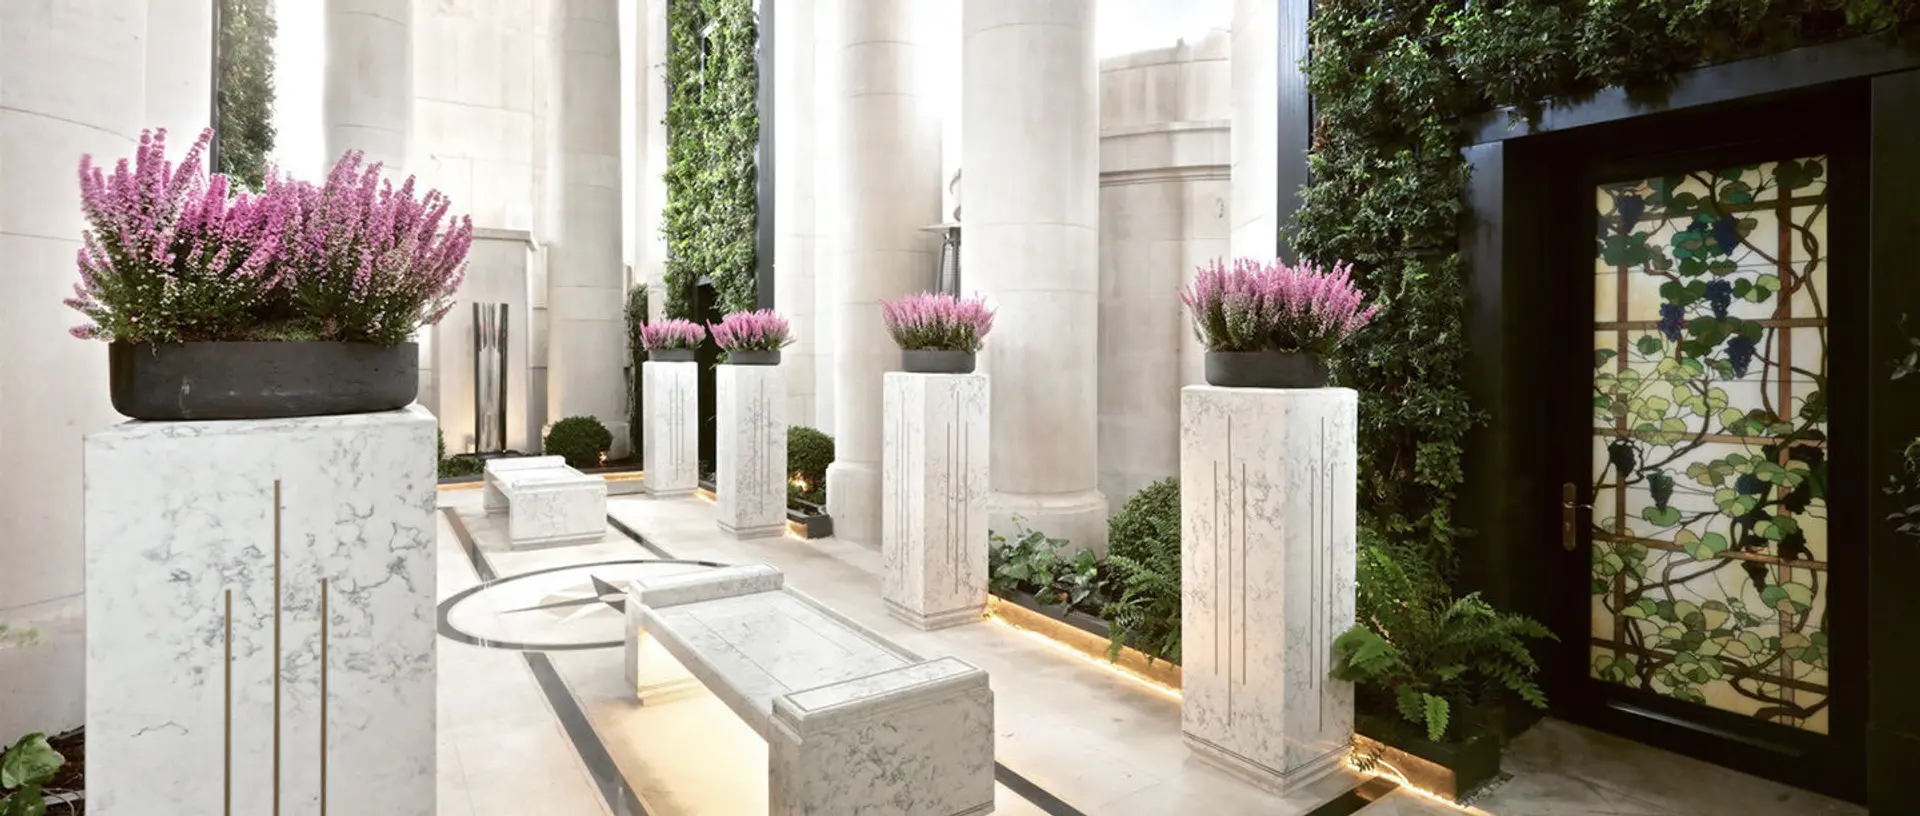 Hotel review Sustainability' - Four Seasons Hotel London at Ten Trinity Square - 1